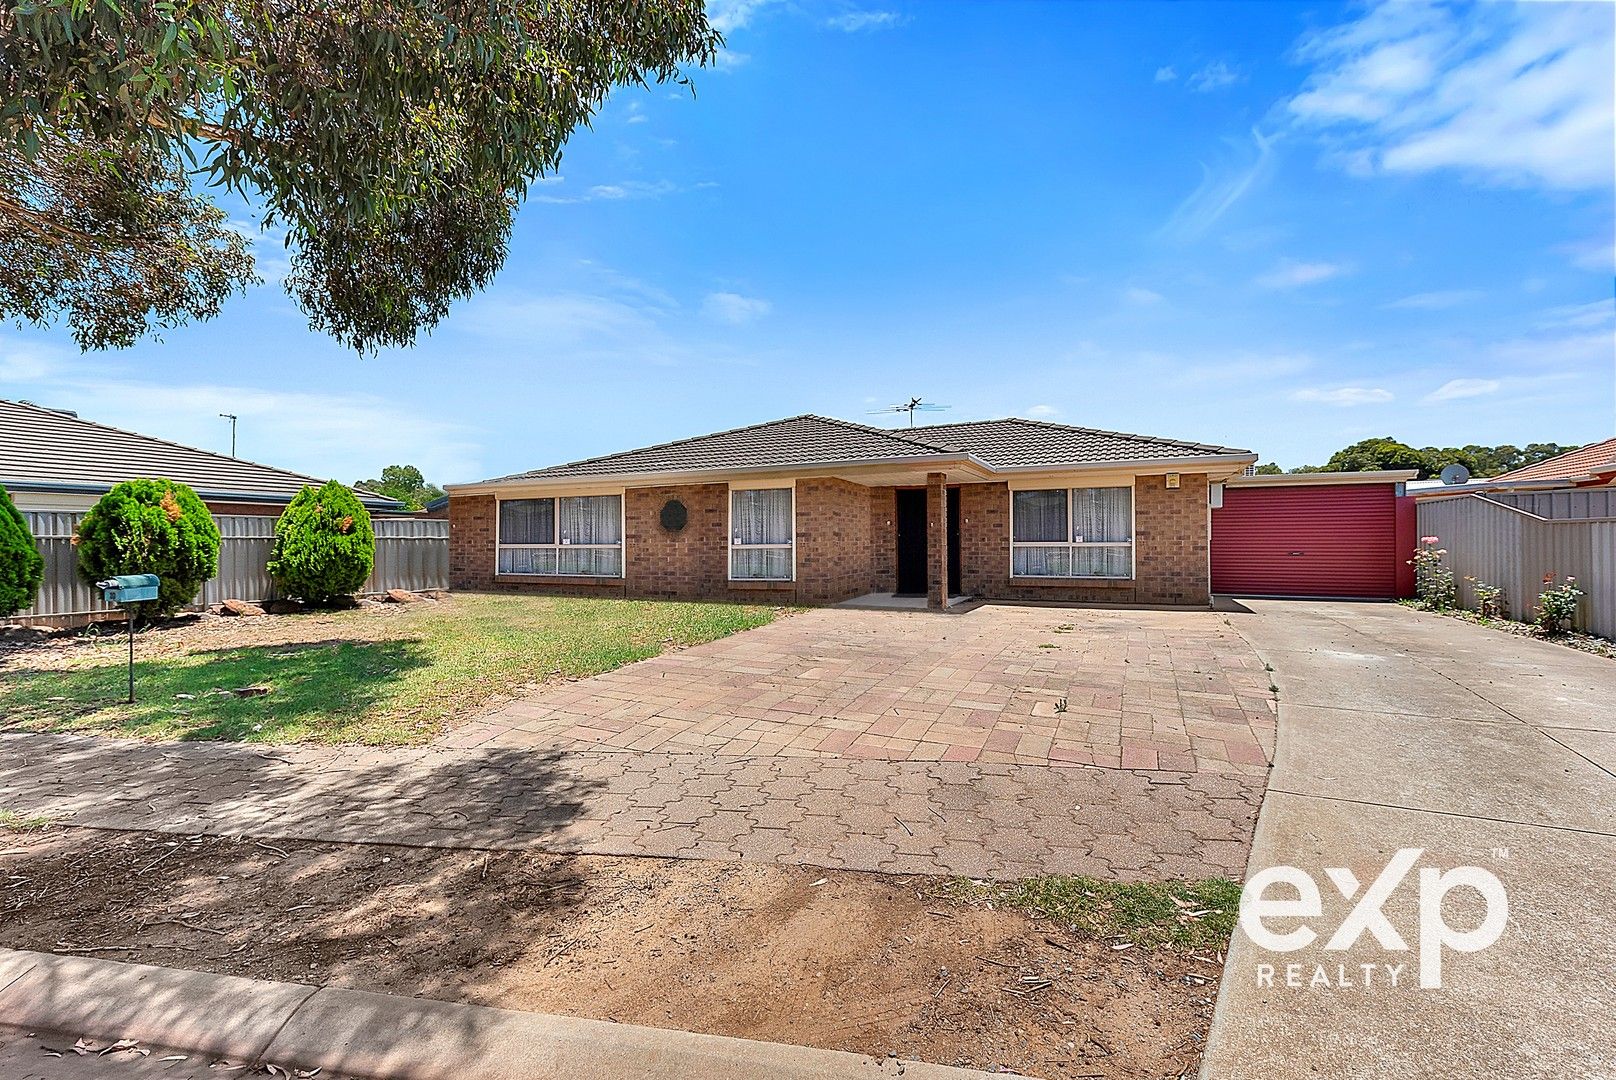 5 bedrooms House in 10 Tregenza Court PARAFIELD GARDENS SA, 5107